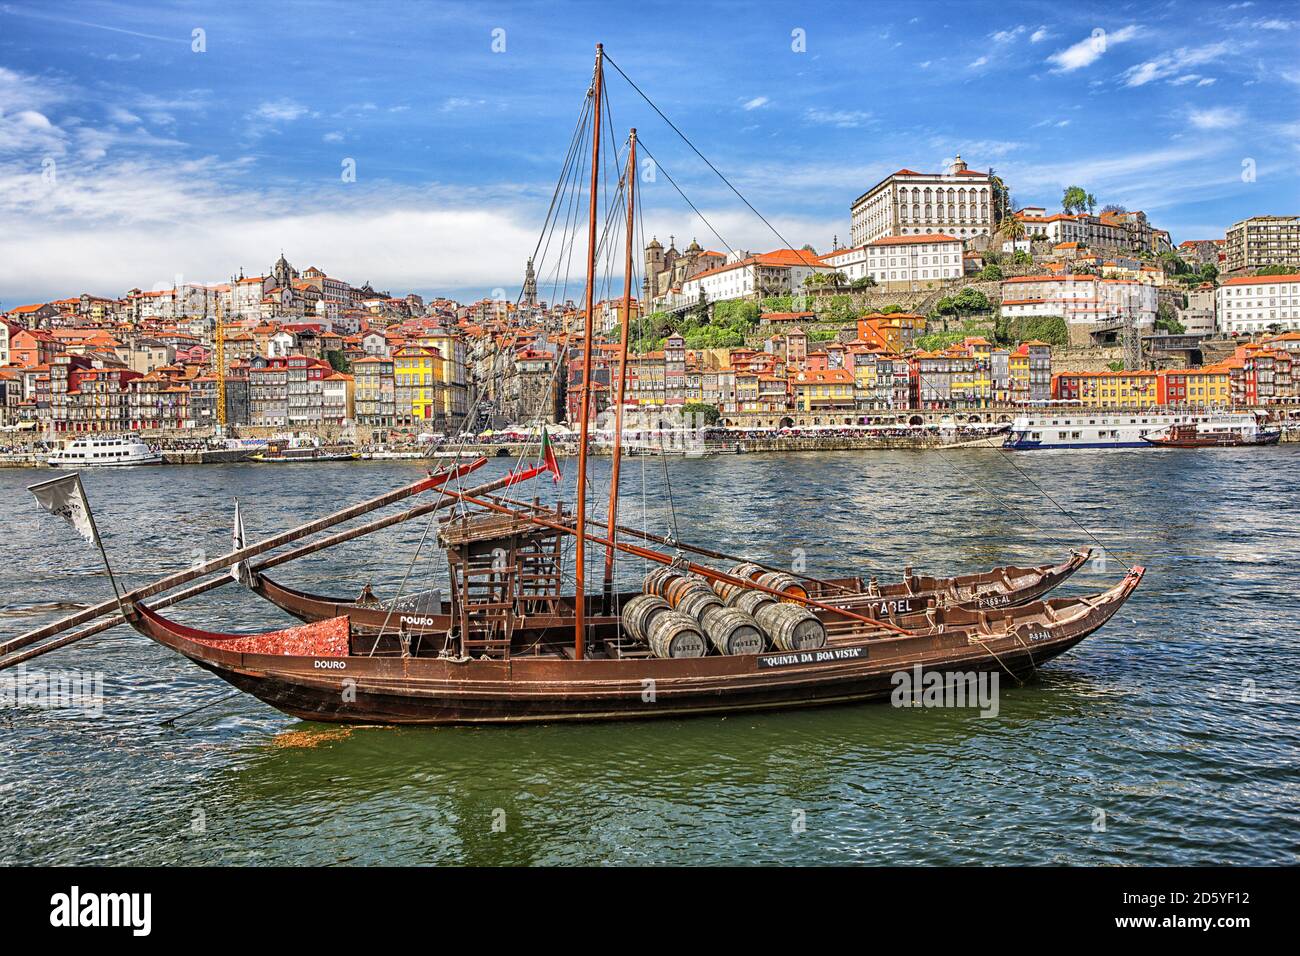 Portugal, Porto, Old town, River Duoro and Barcos Rabelos Stock Photo